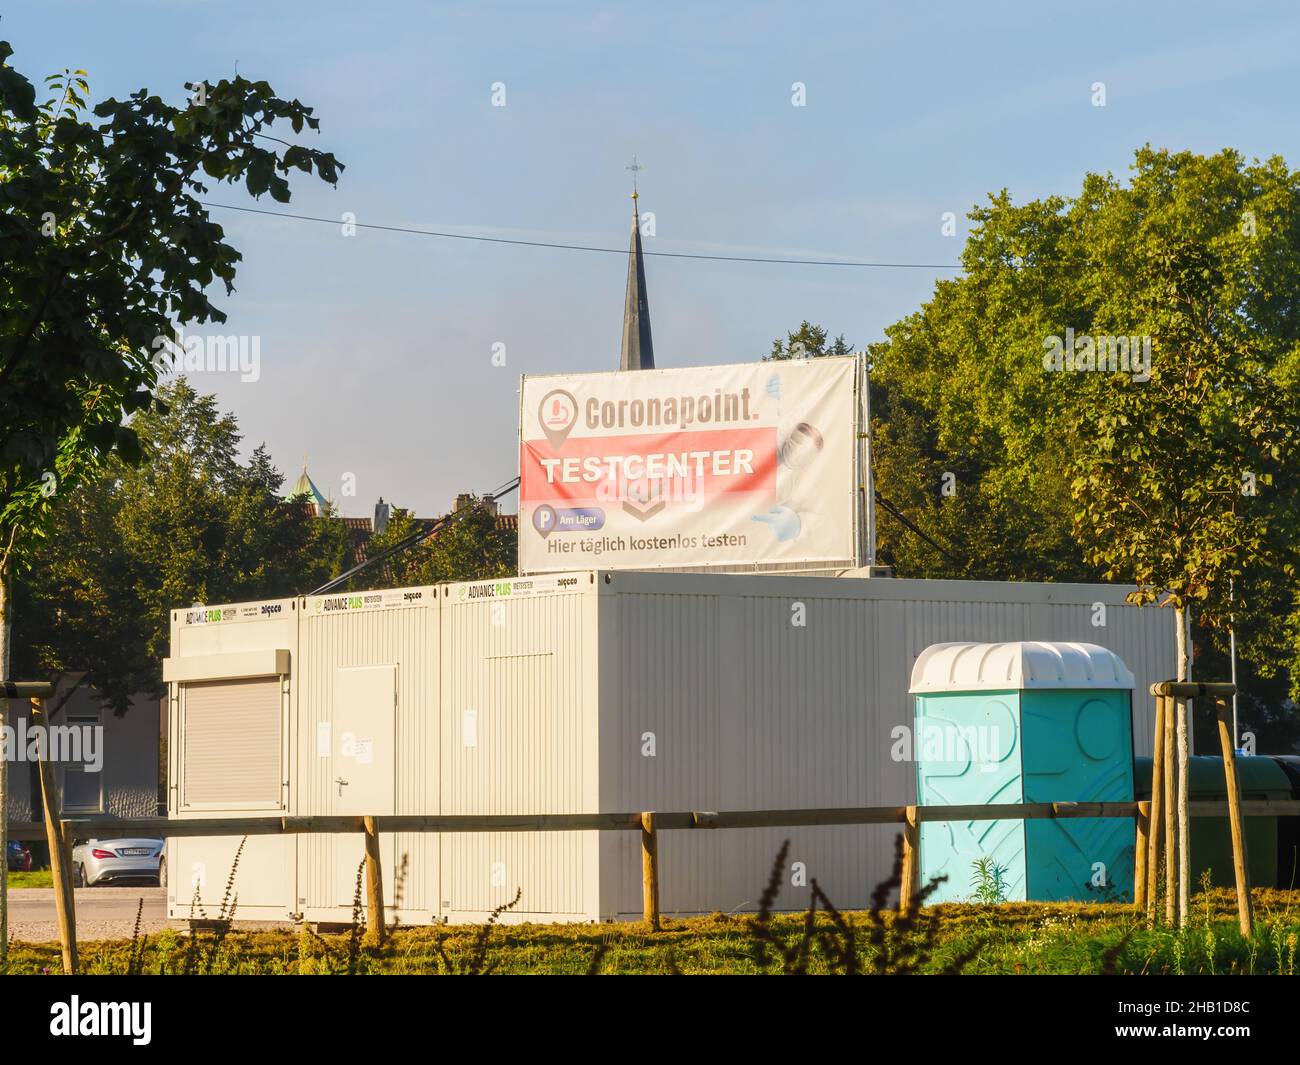 Coronapoint Testcenter in German city of Kehl with curch spire in background Stock Photo